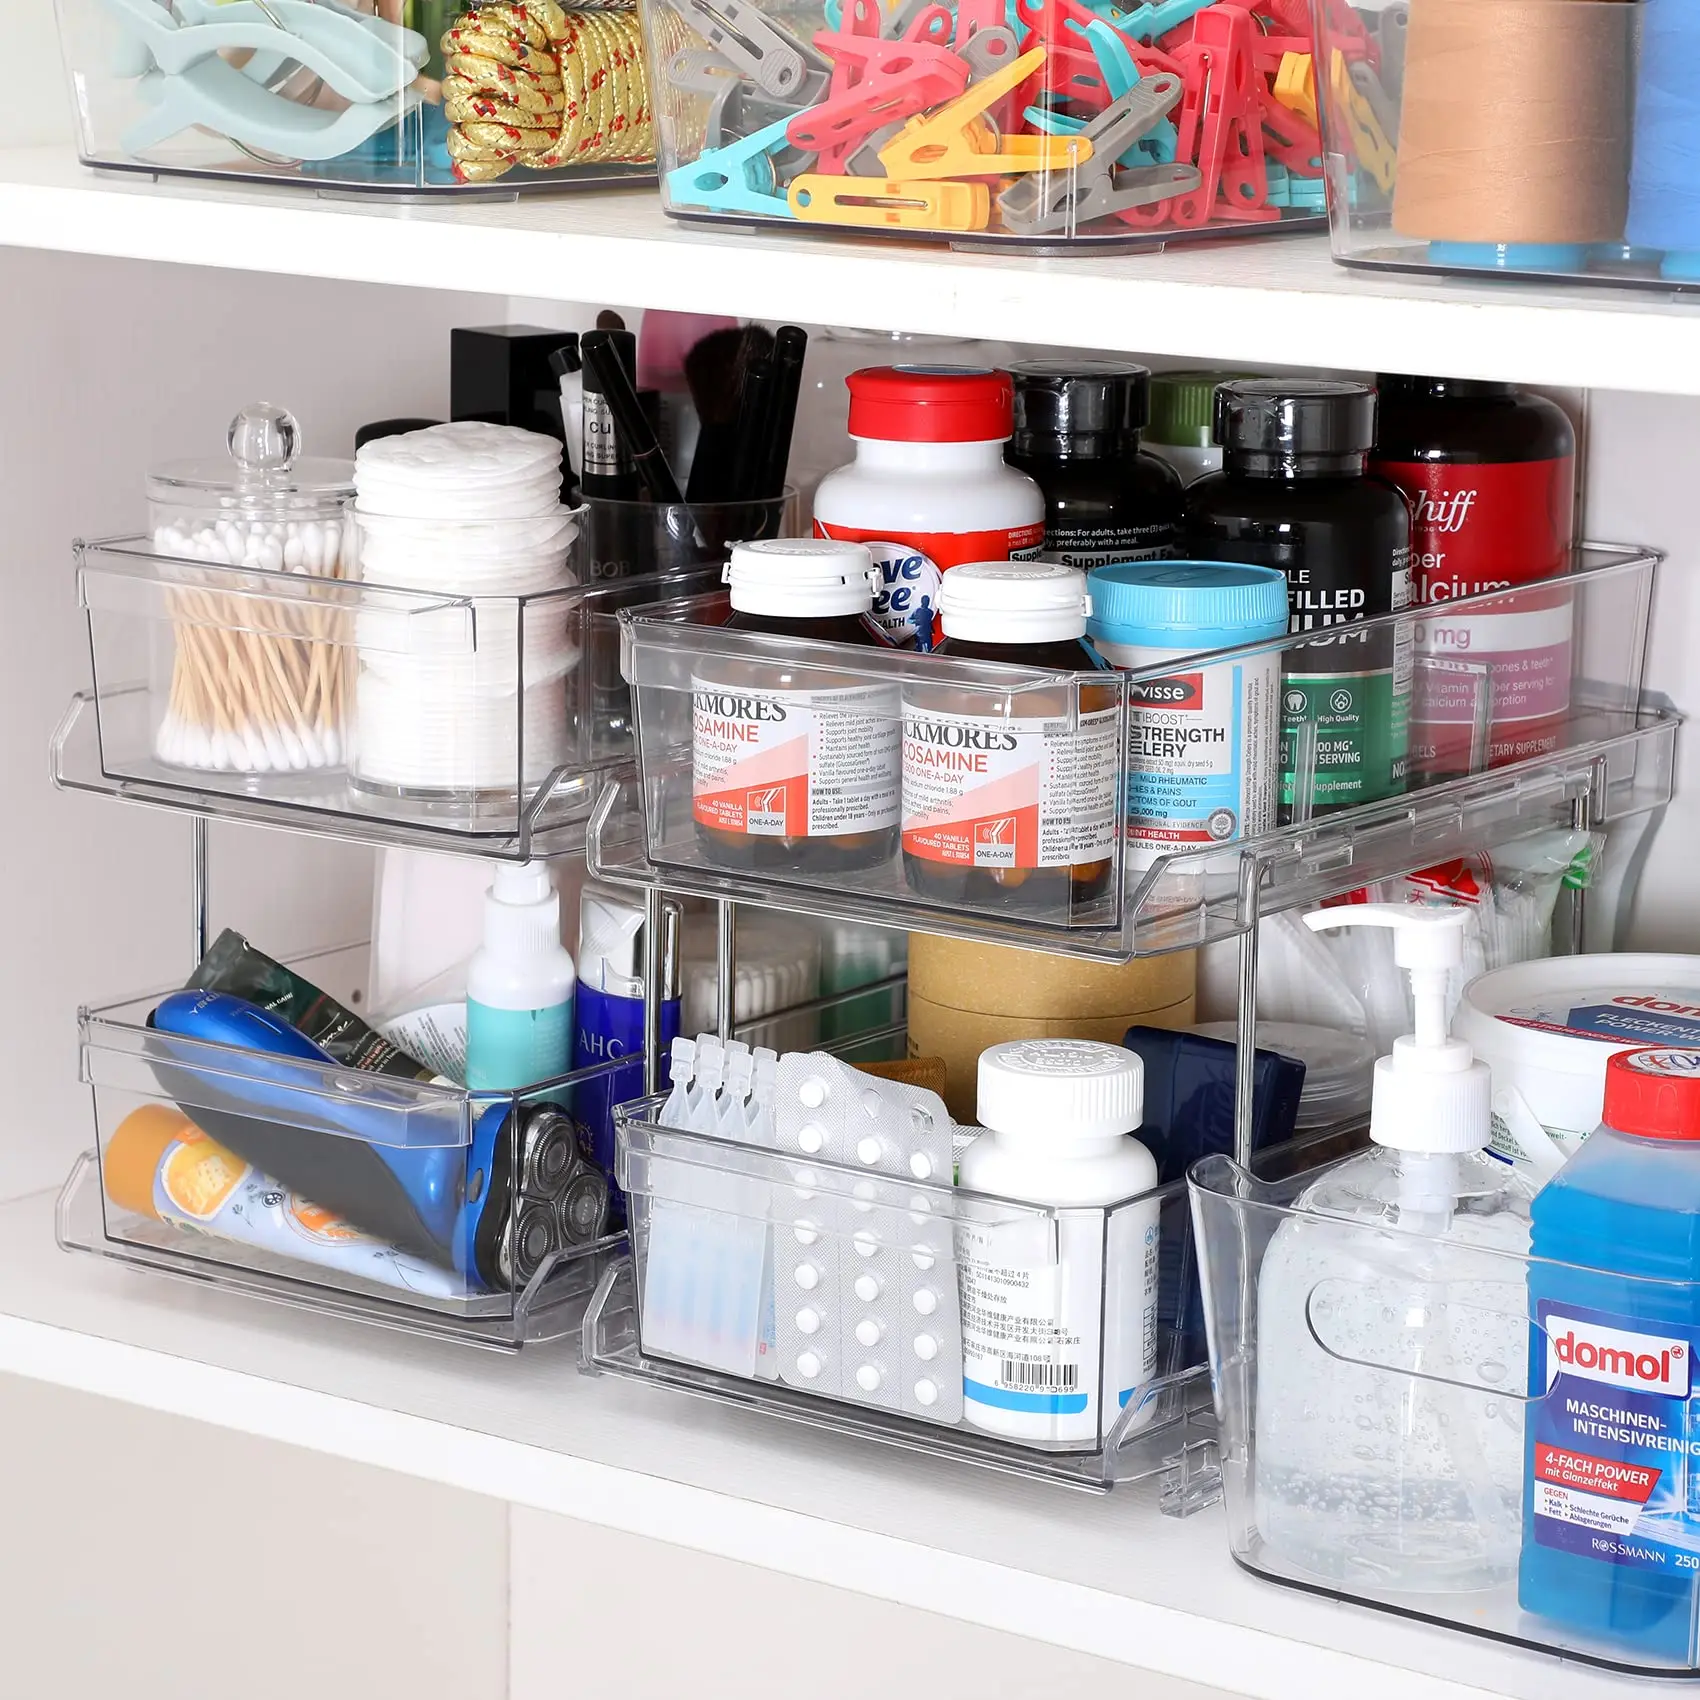 https://ae01.alicdn.com/kf/S88f74554c2894506adec23f10f2f15bar/2-Tier-Clear-Organizer-with-Dividers-for-Cabinet-Counter-MultiUse-Slide-Out-Storage-Container-Kitchen-Under.jpg